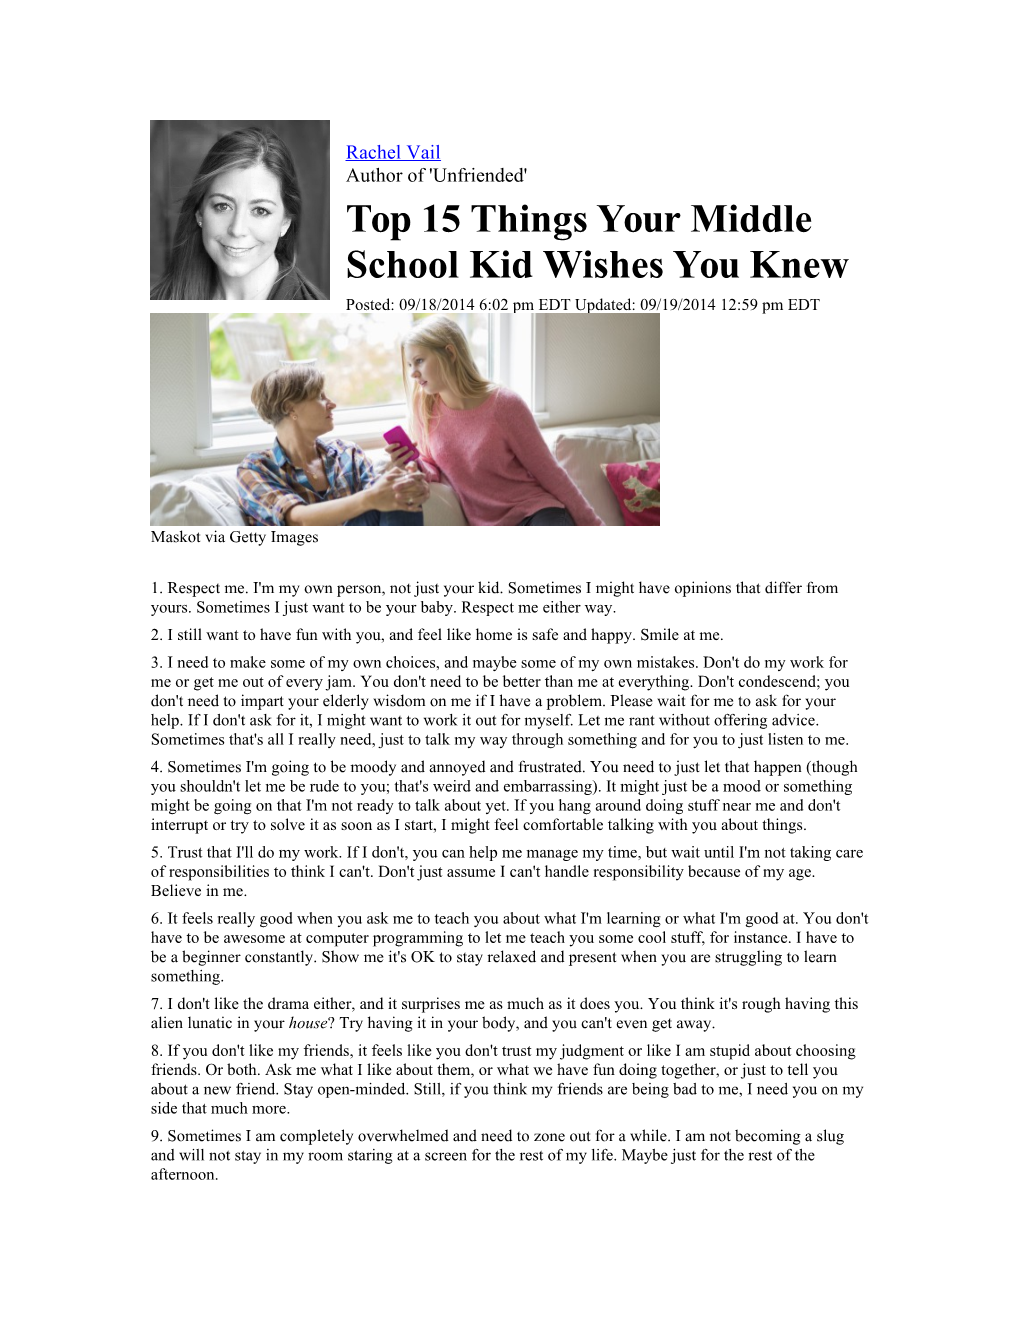 Top 15 Things Your Middle School Kid Wishes You Knew